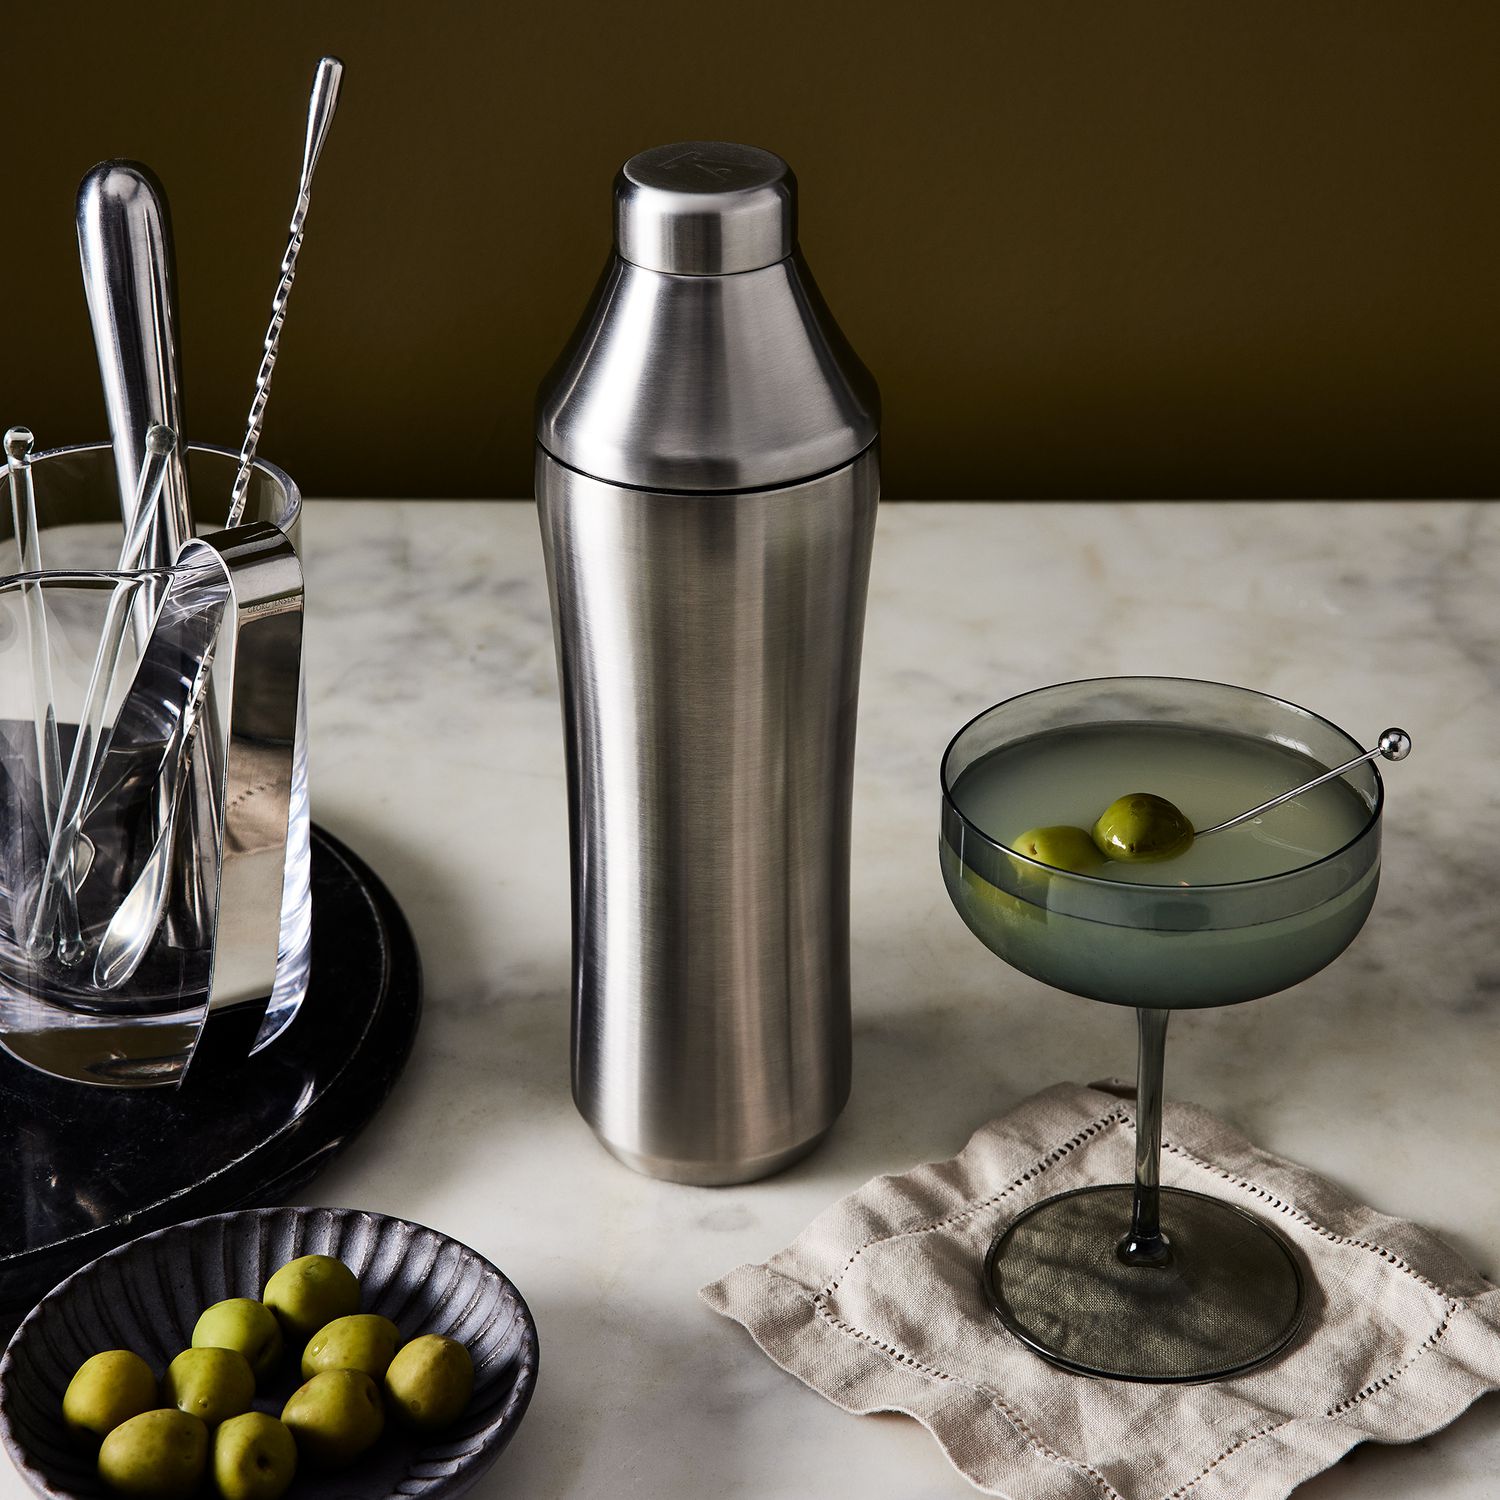 Elevated Craft Double Walled Hybrid Cocktail Shaker